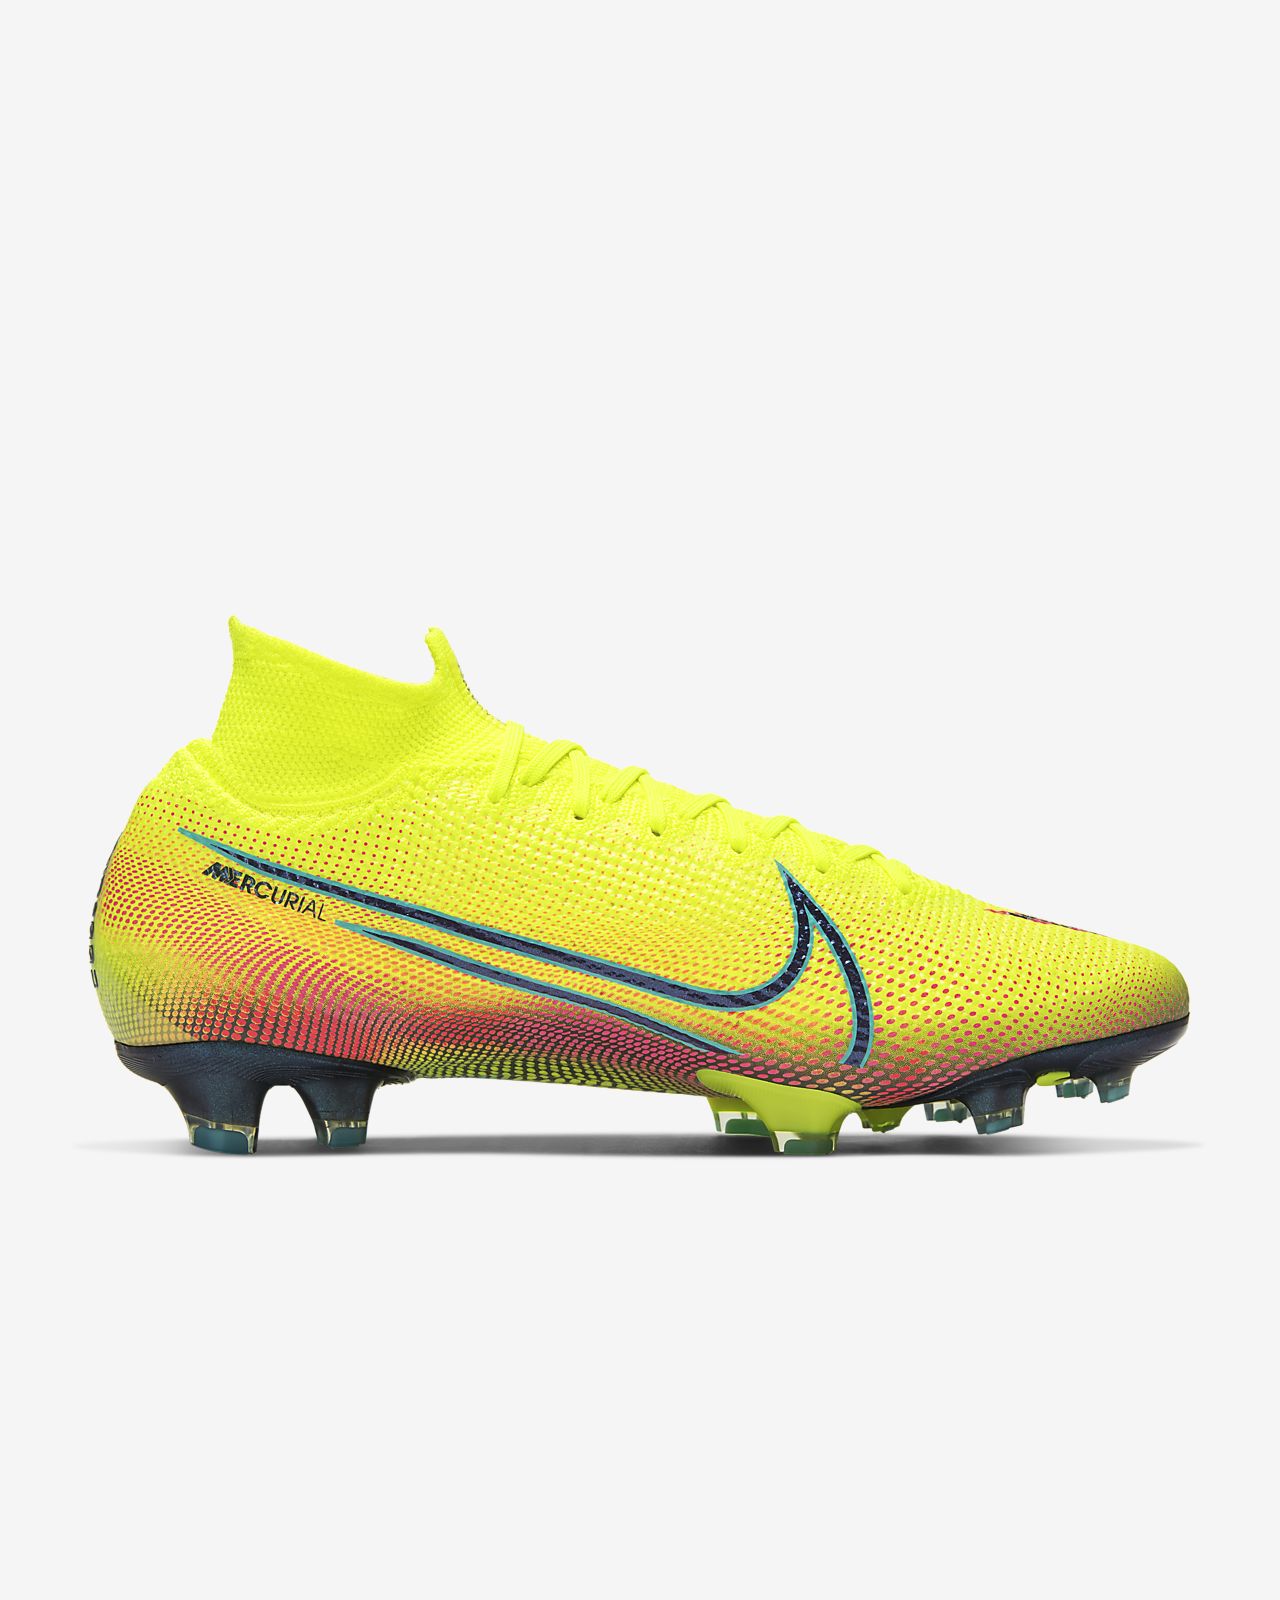 The Official Nike Mercurial Superfly VII Elite FG New Lights.